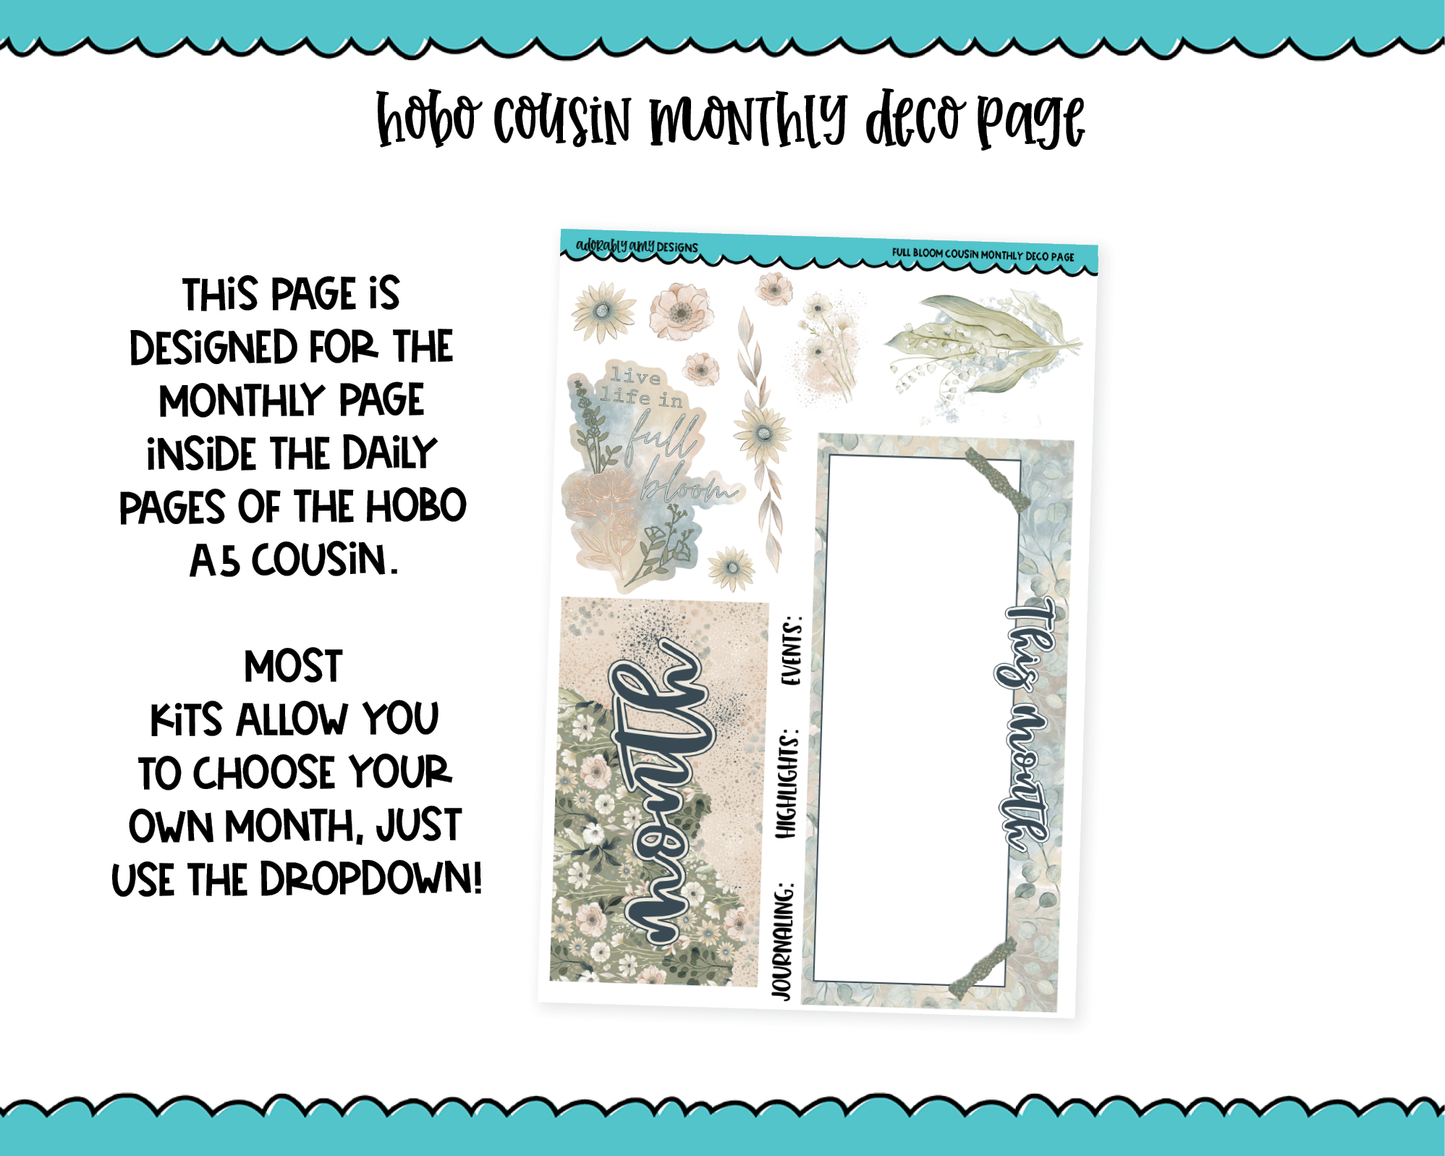 Hobonichi Cousin Monthly Pick Your Month Full Bloom Planner Sticker Kit for Hobo Cousin or Similar Planners